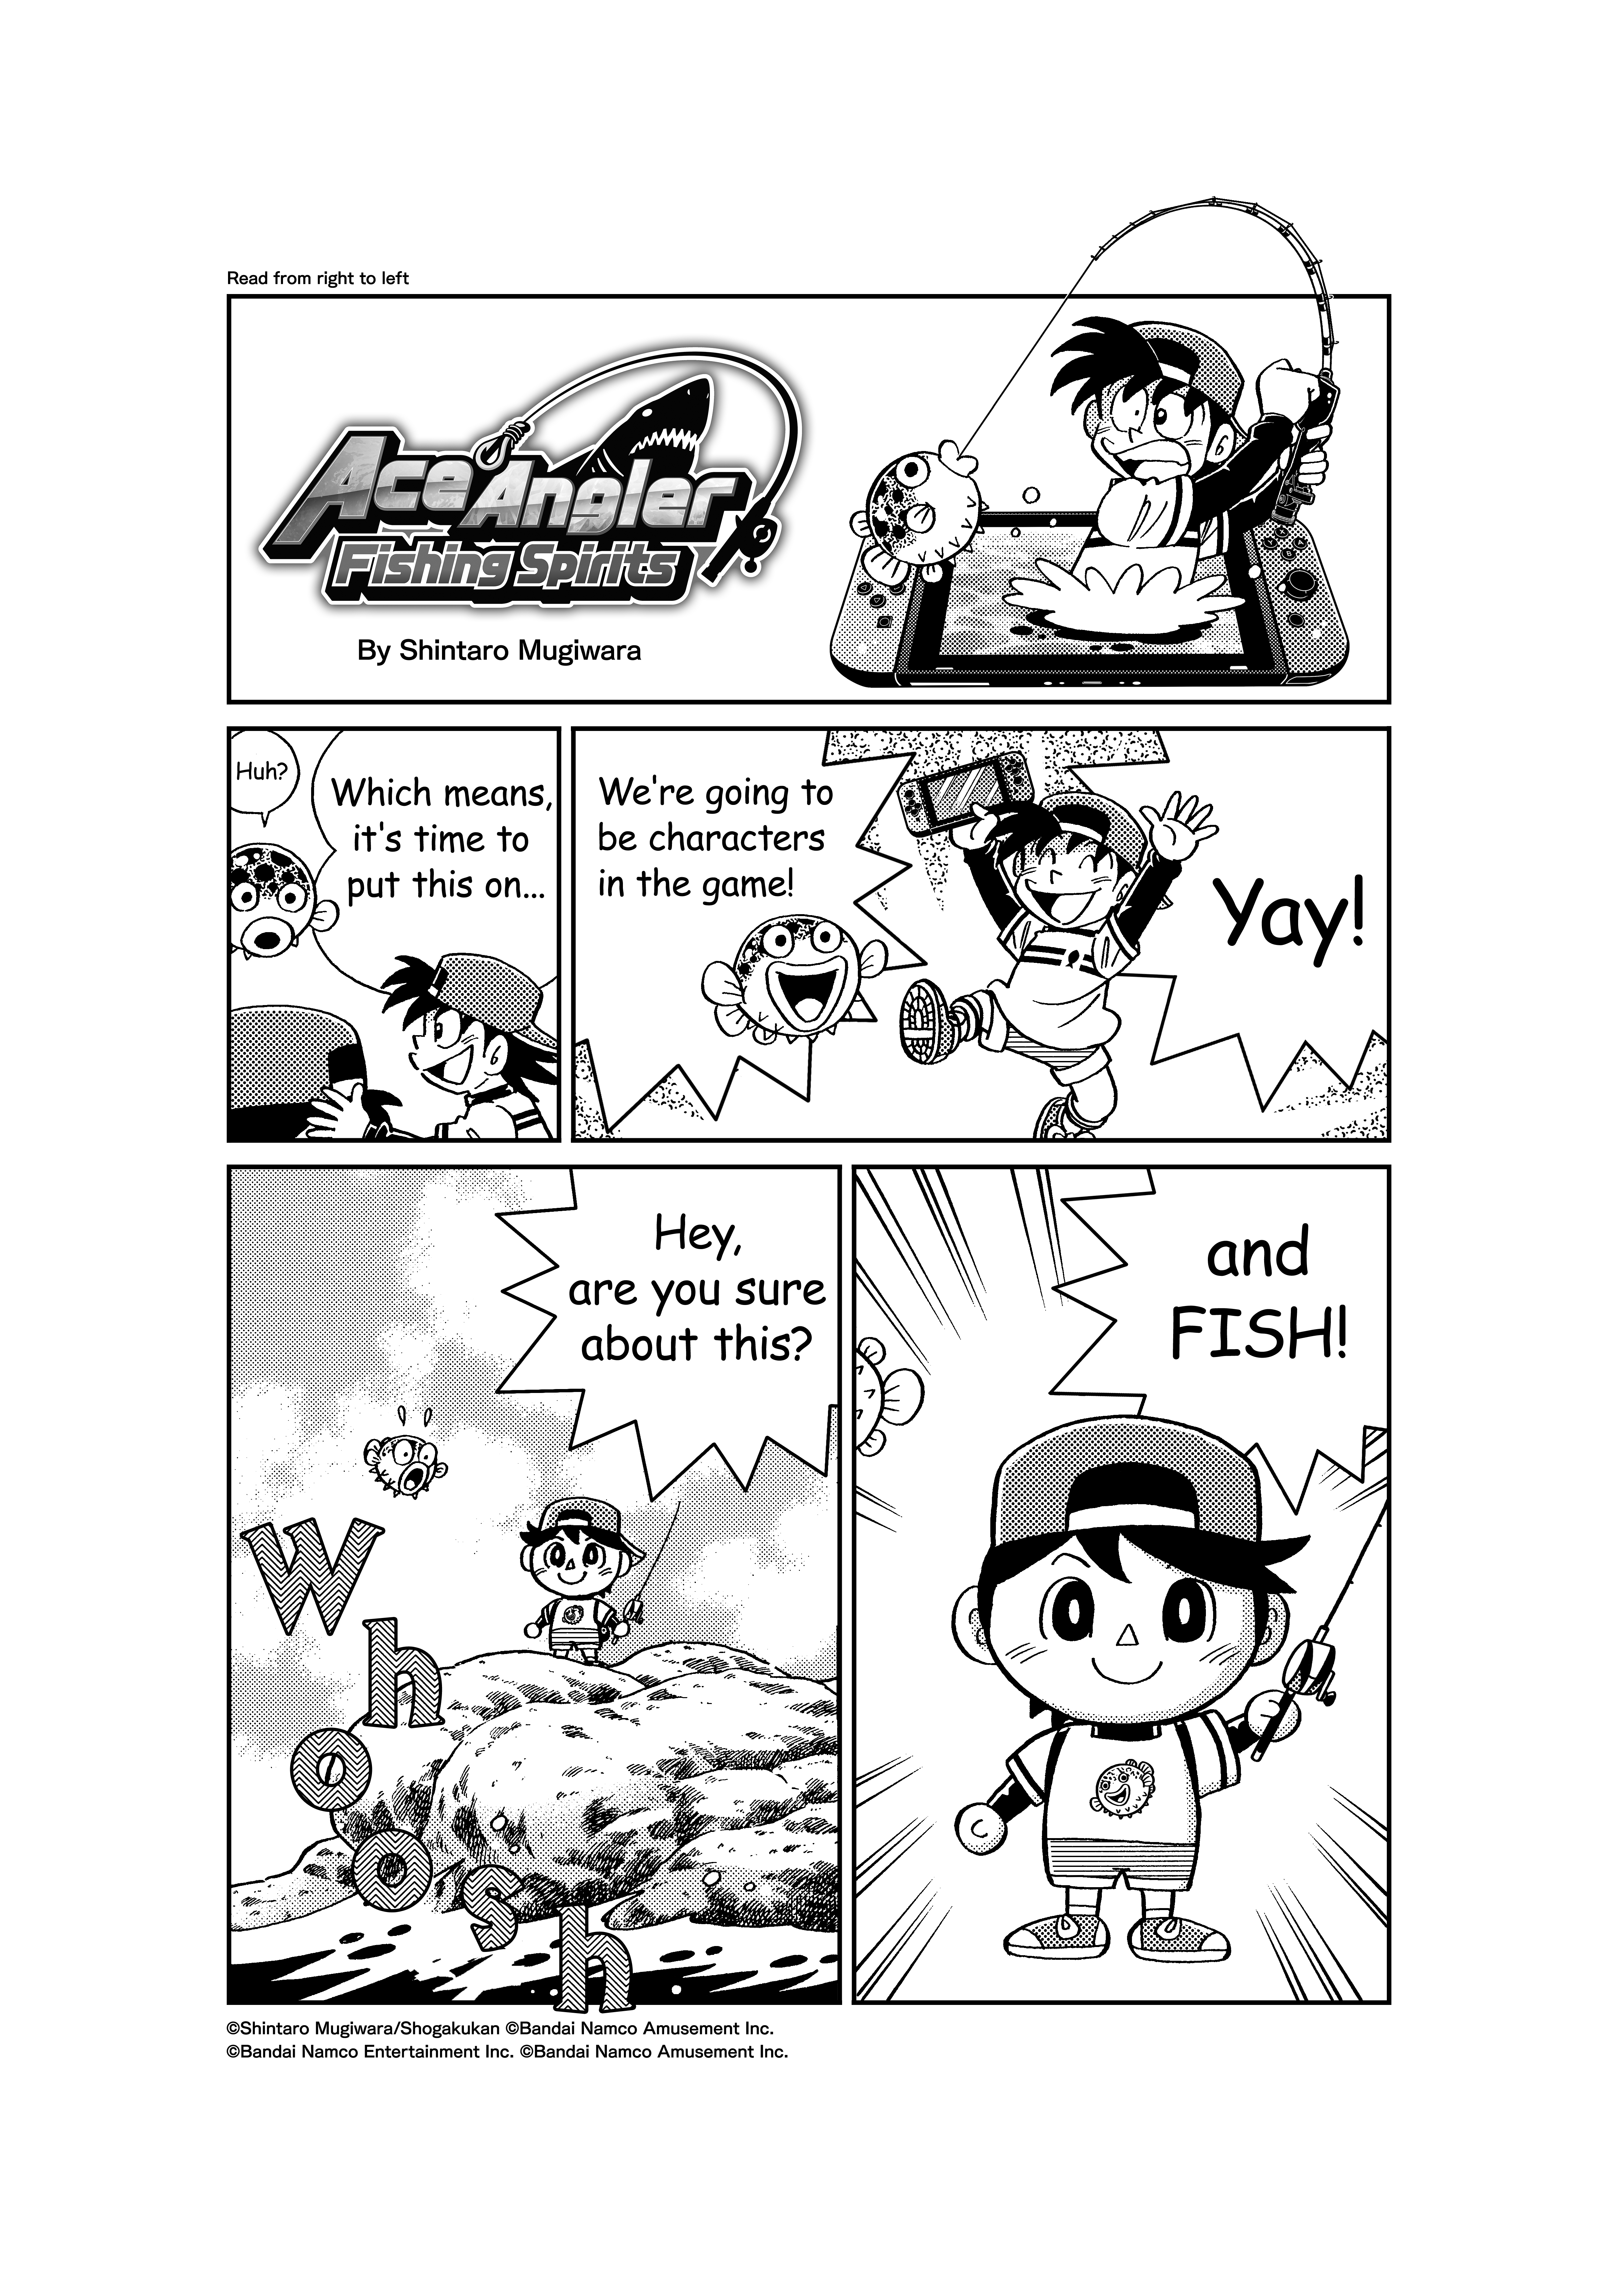 Free update in collaboration with the manga version of Ace Angler